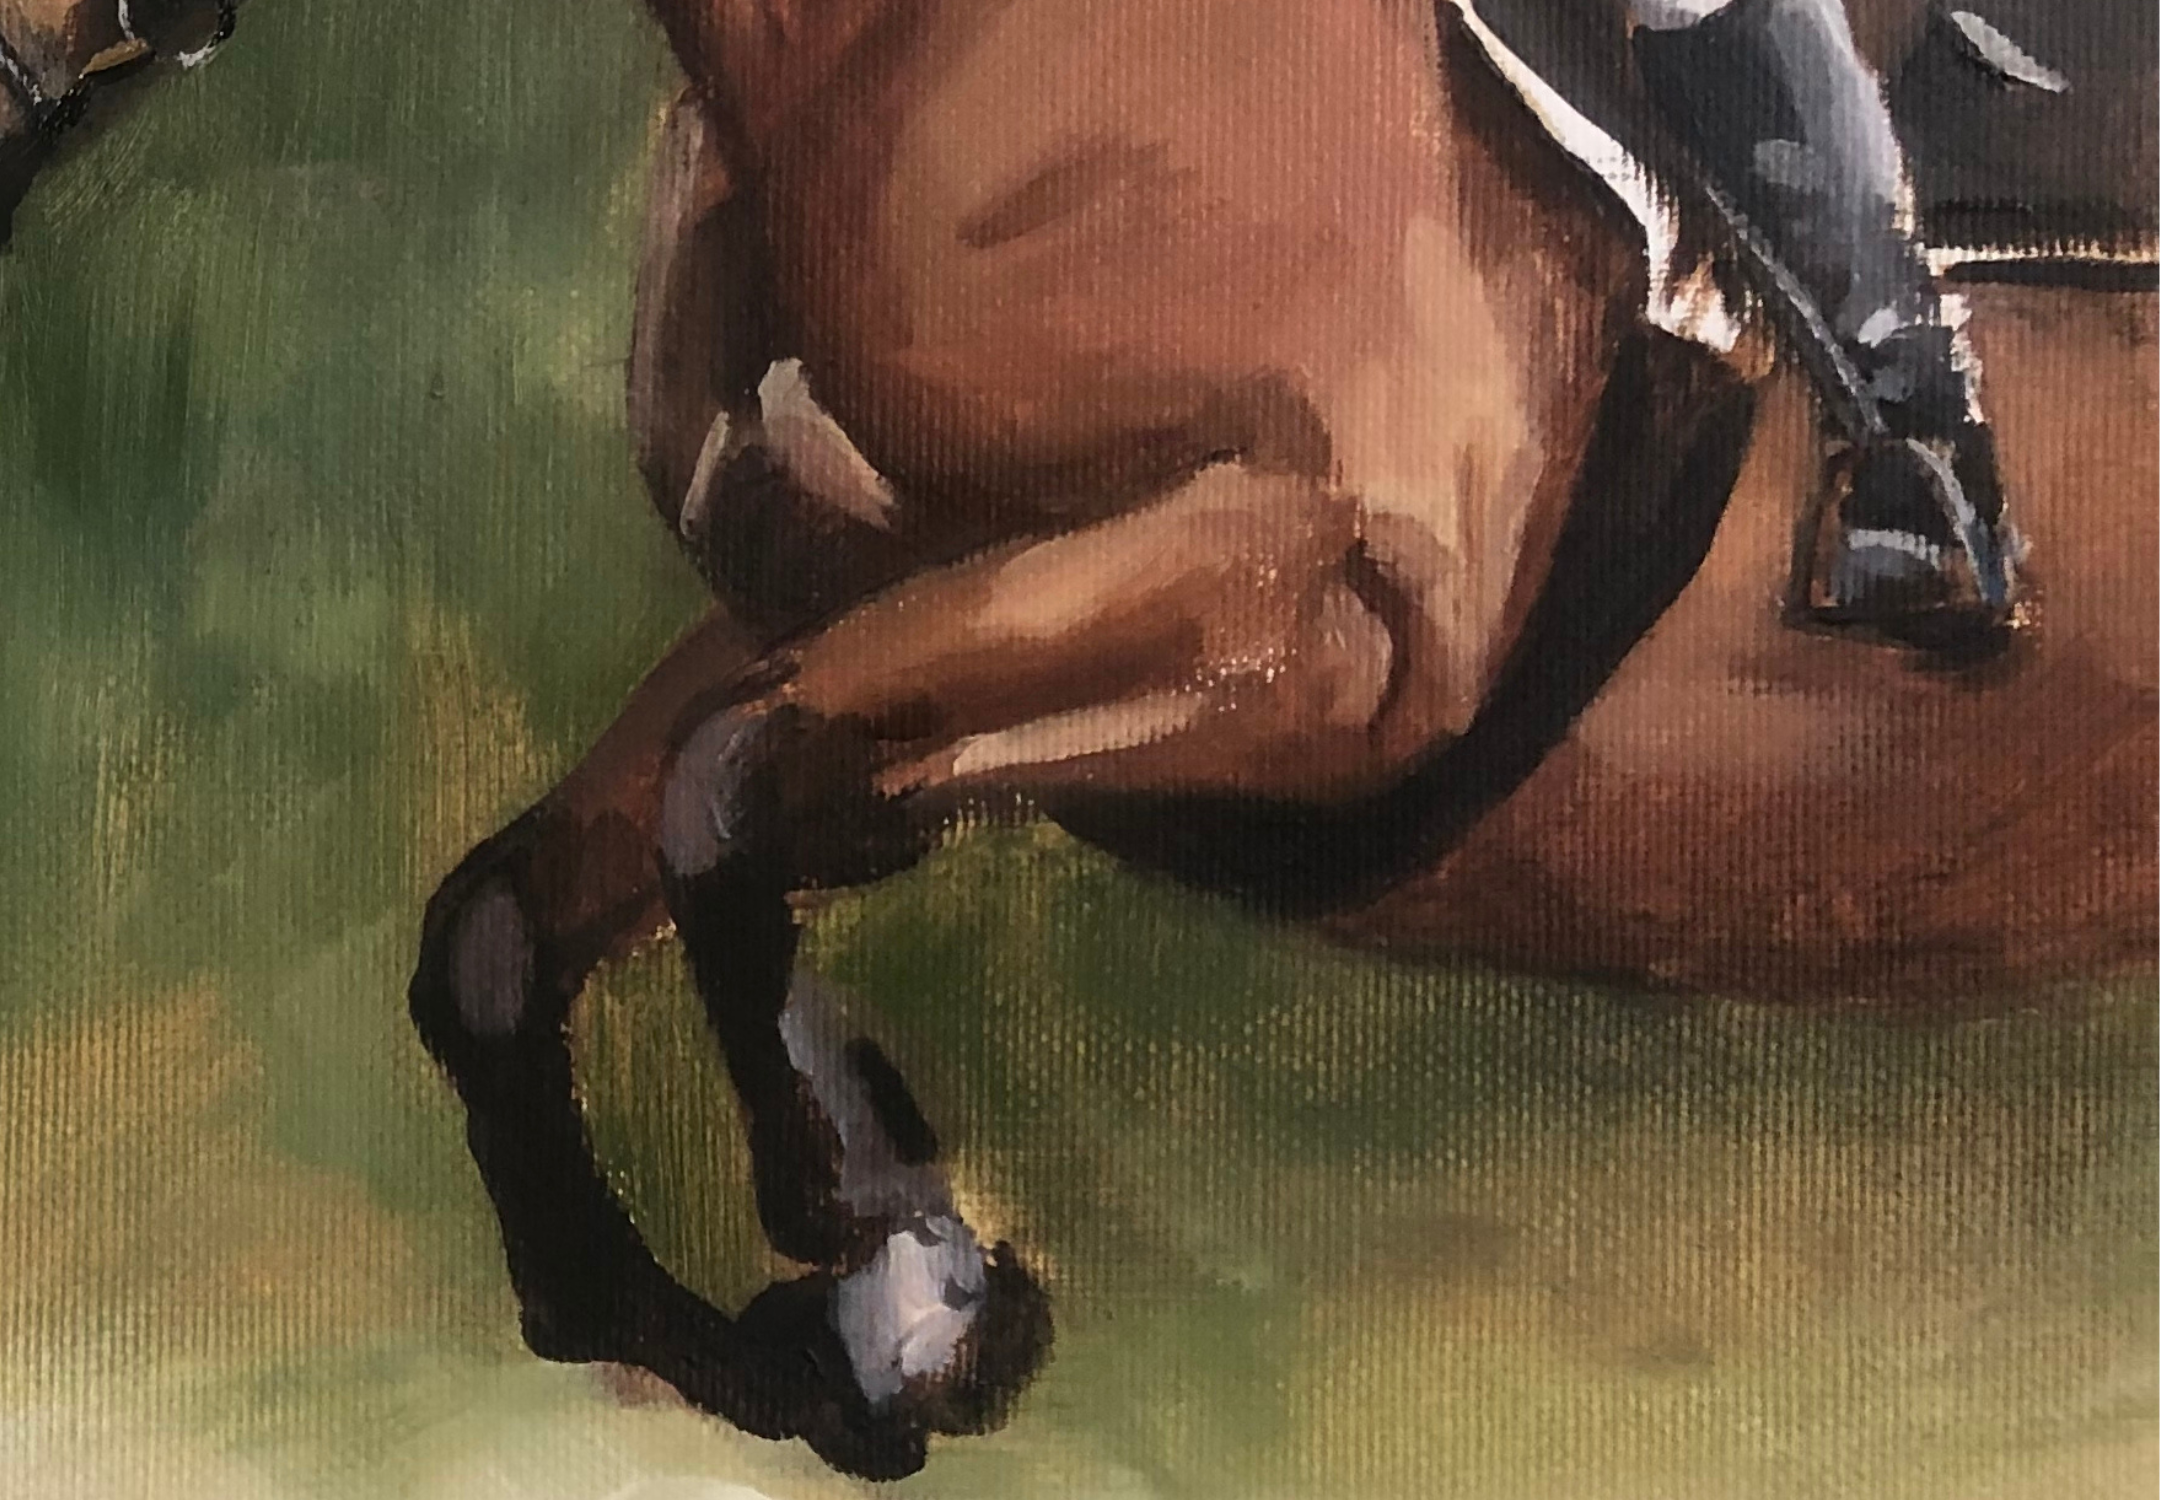 Jumping Horses with Rider 30x40cm detail 3